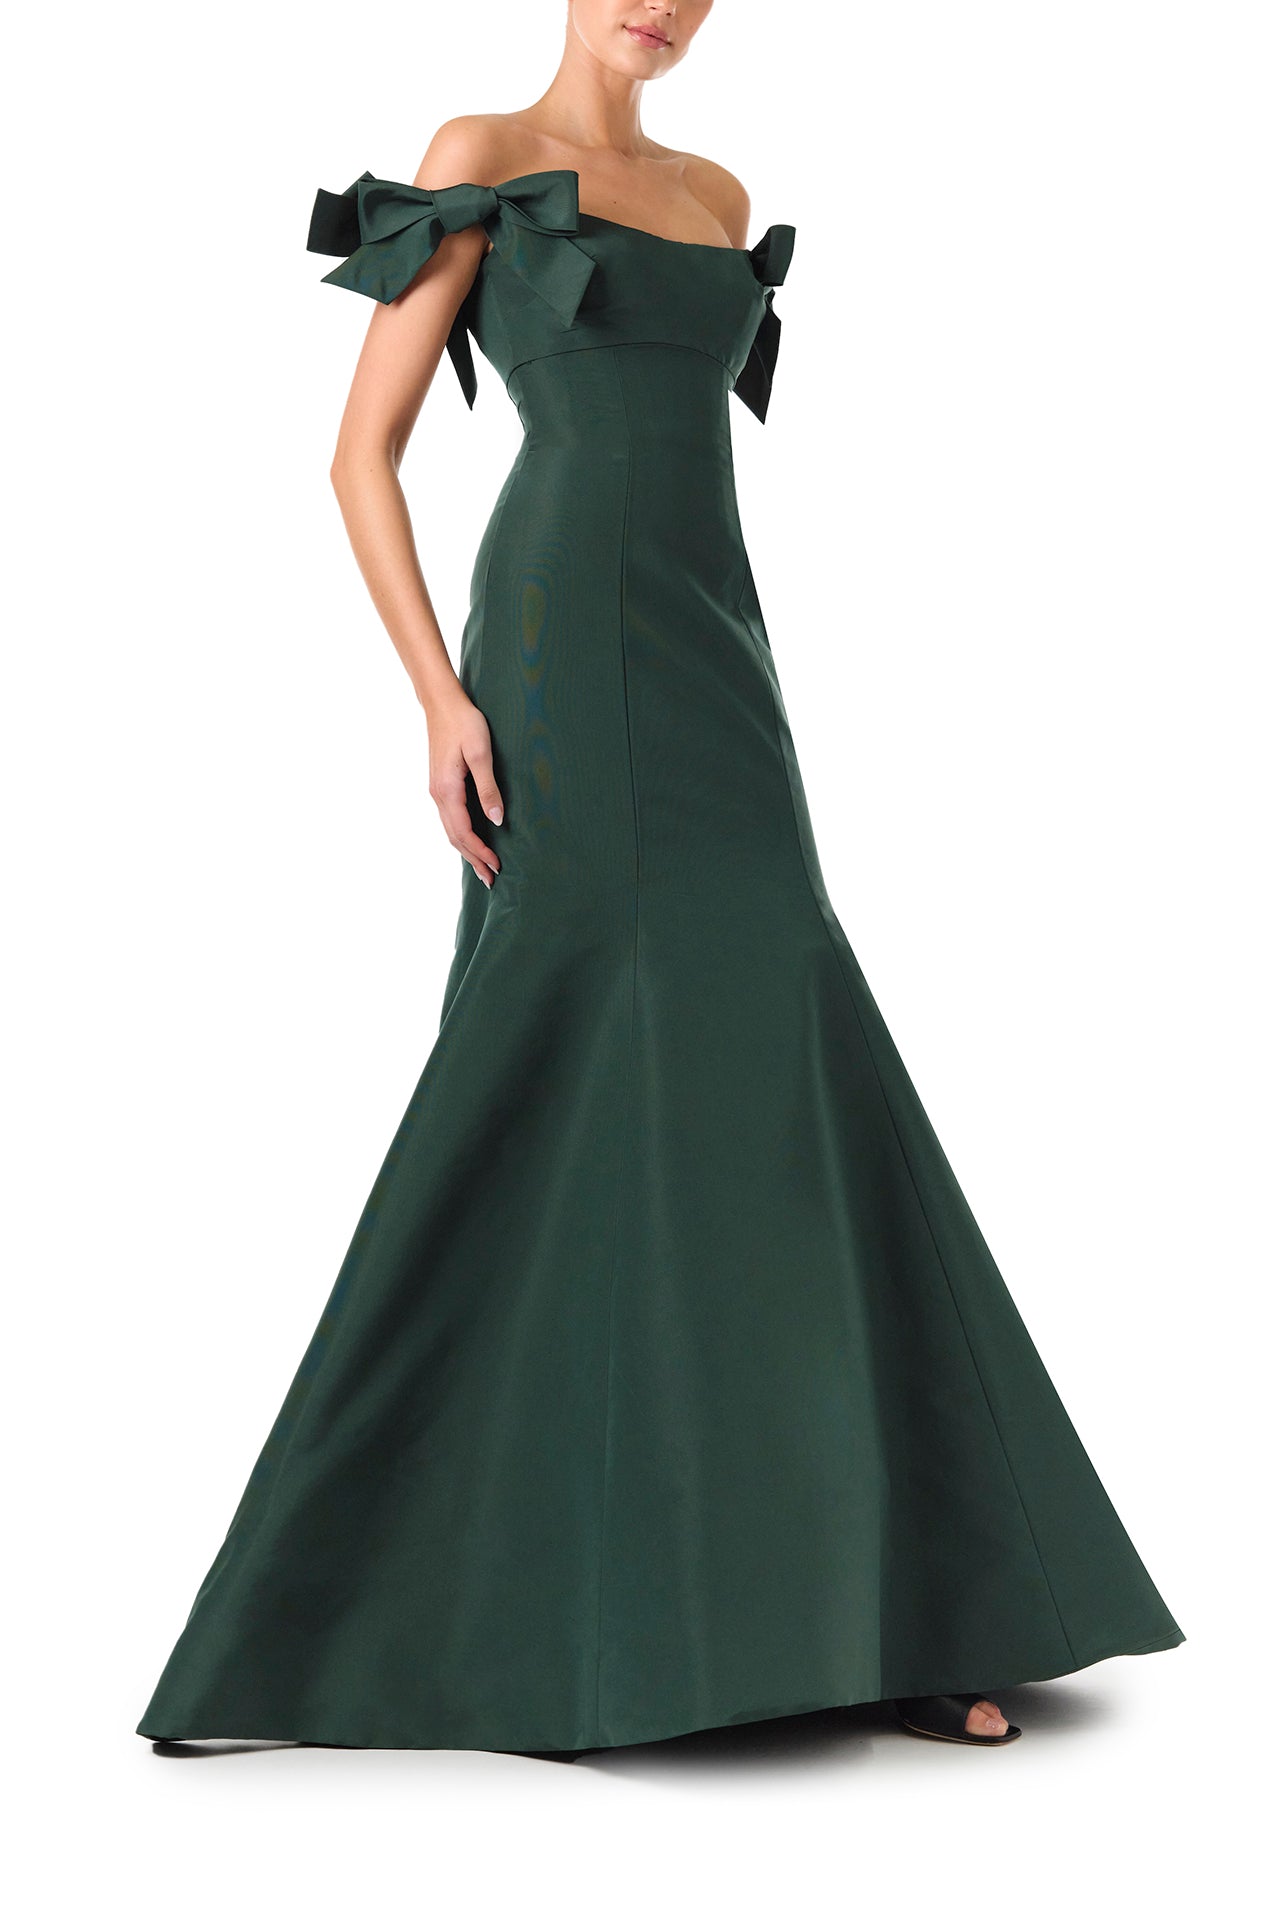 Monique Lhuillier Fall 2024 off the shoulder gown with trumpet skirt and bow sleeves in Juniper green faille fabric - right side.